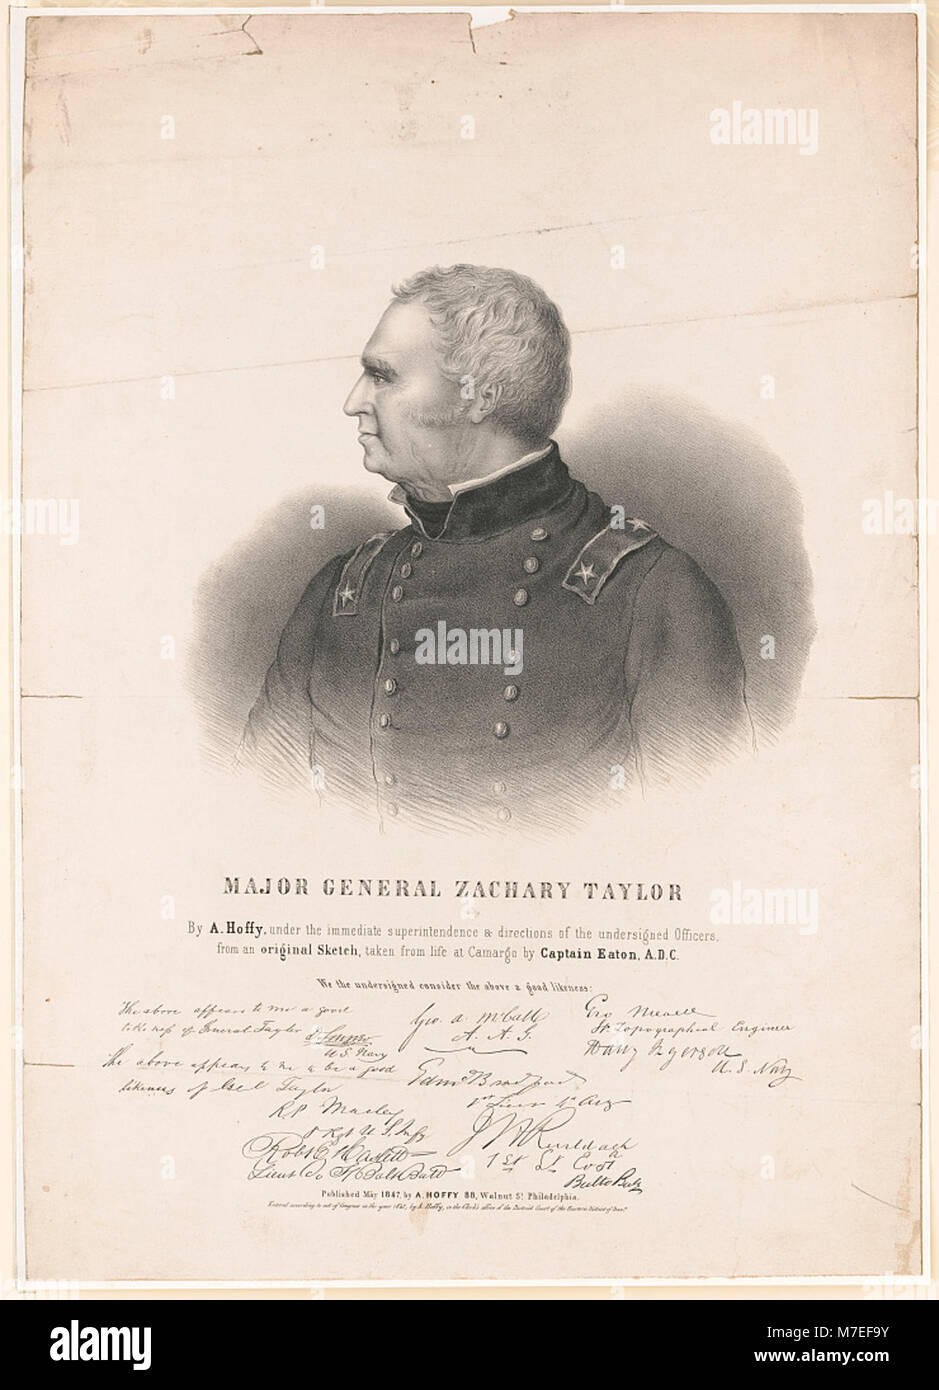 Major General Zachary Taylor - by A. Hoffy, under the immediate superintendence & directions of the undersigned officers, from an original sketch taken from life at Camargo by Captain Eaton, LCCN2018645790 Stock Photo